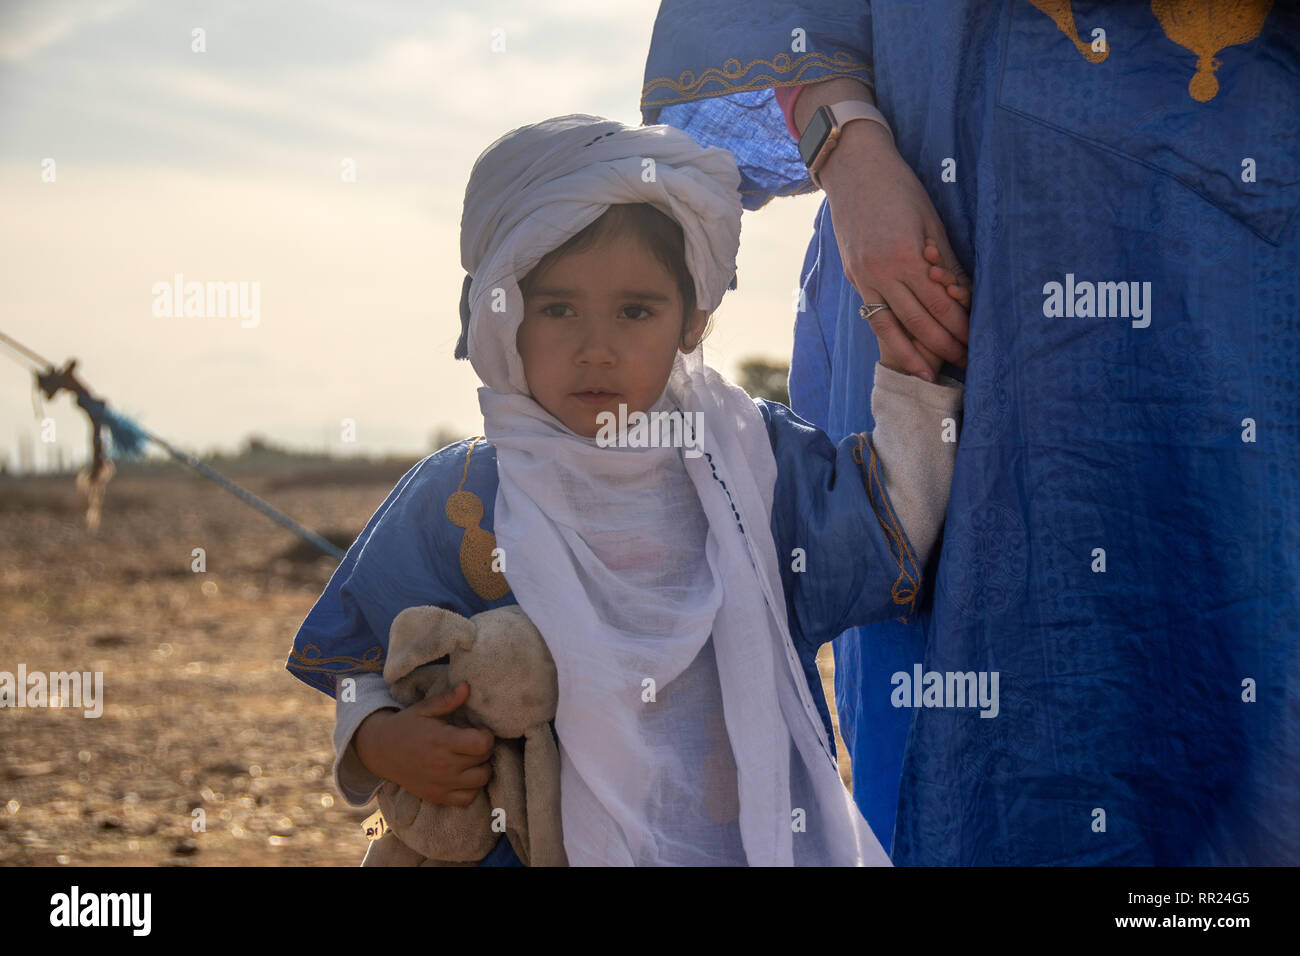 Little girl in traditional arabic dress holding her mother's hand. Stock Photo